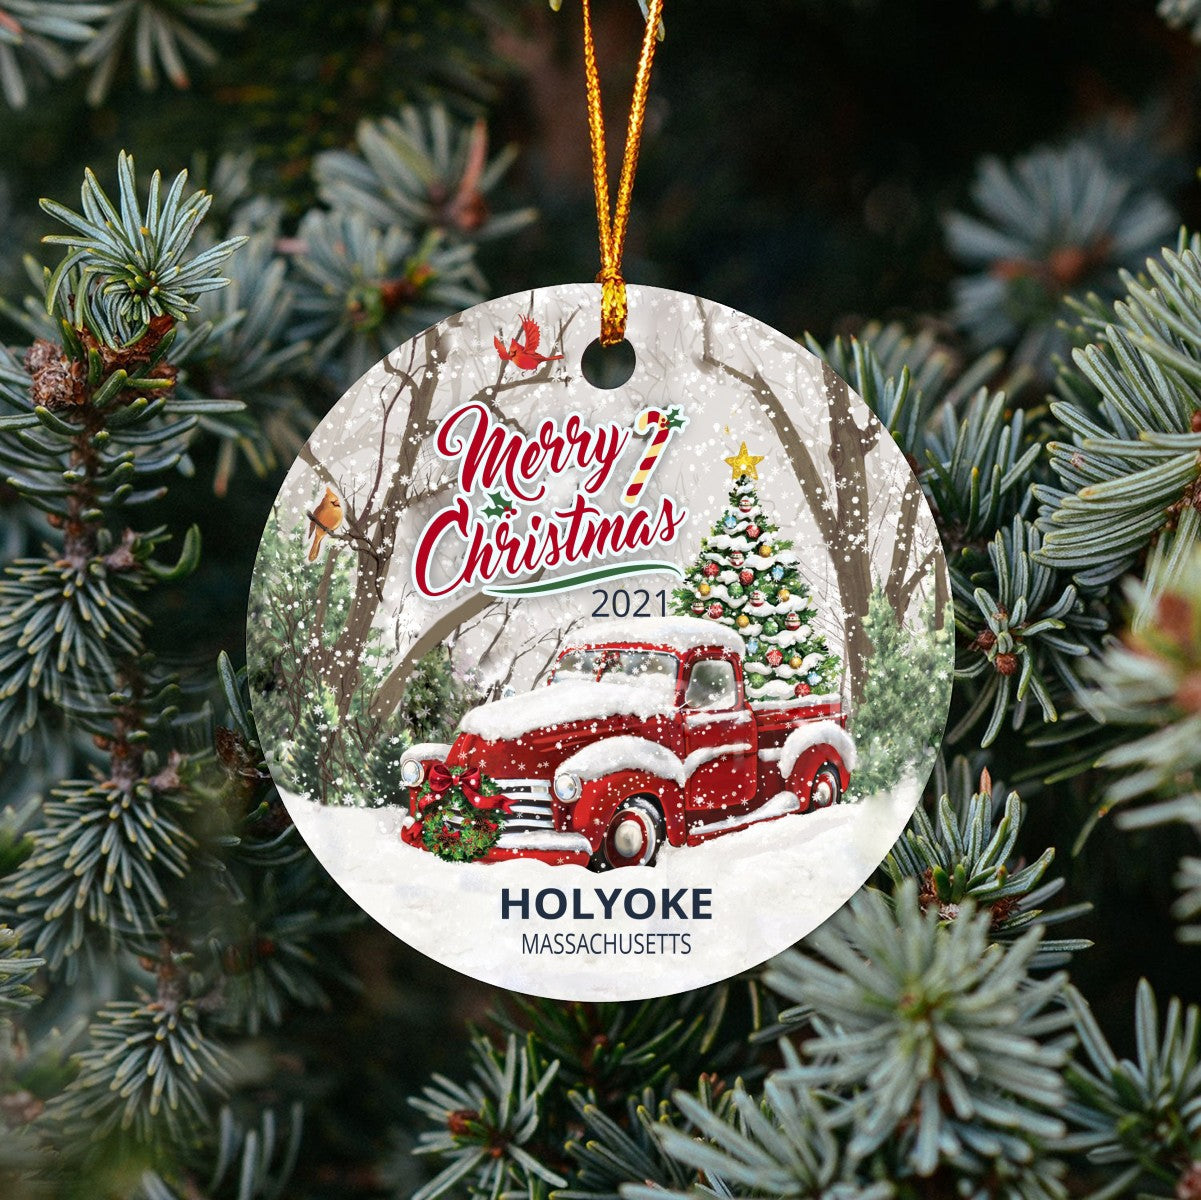 Christmas Tree Ornaments Holyoke - Ornament Customize With Name City And State Holyoke Massachusetts MA - Red Truck Xmas Ornaments 3'' Plastic Gift For Family, Friend And Housewarming